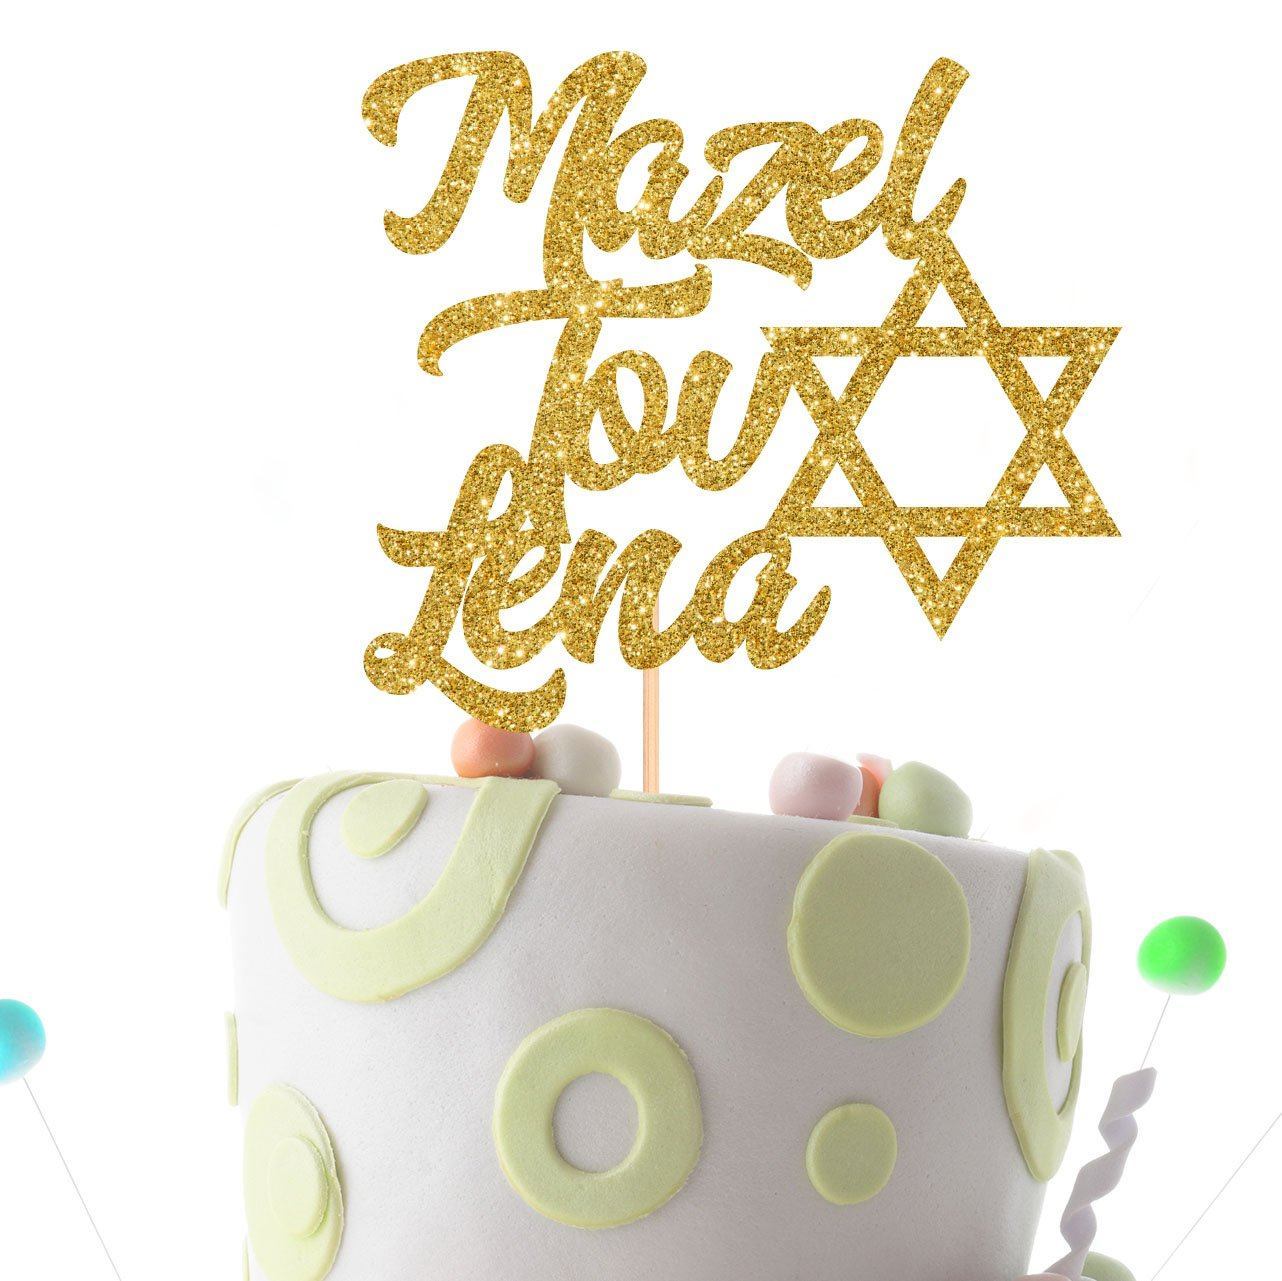 Personalised Mazel Tov Cake Topper, Jewish Holiday, Hebrew Congratulations Topper